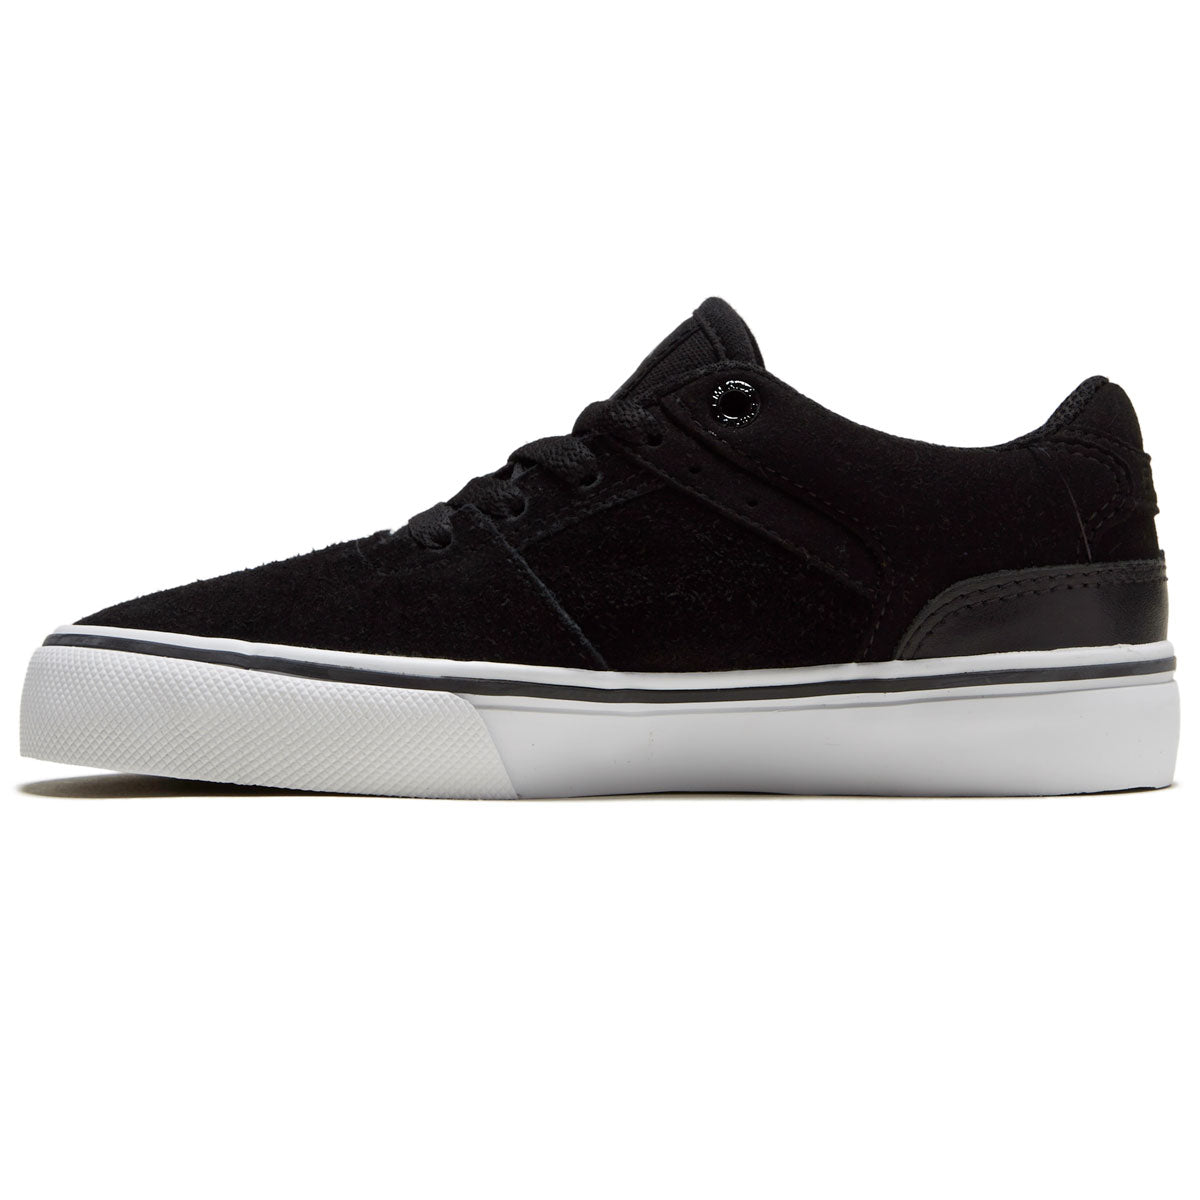 Emerica Youth The Low Vulc Shoes - Black/White/Gum image 2